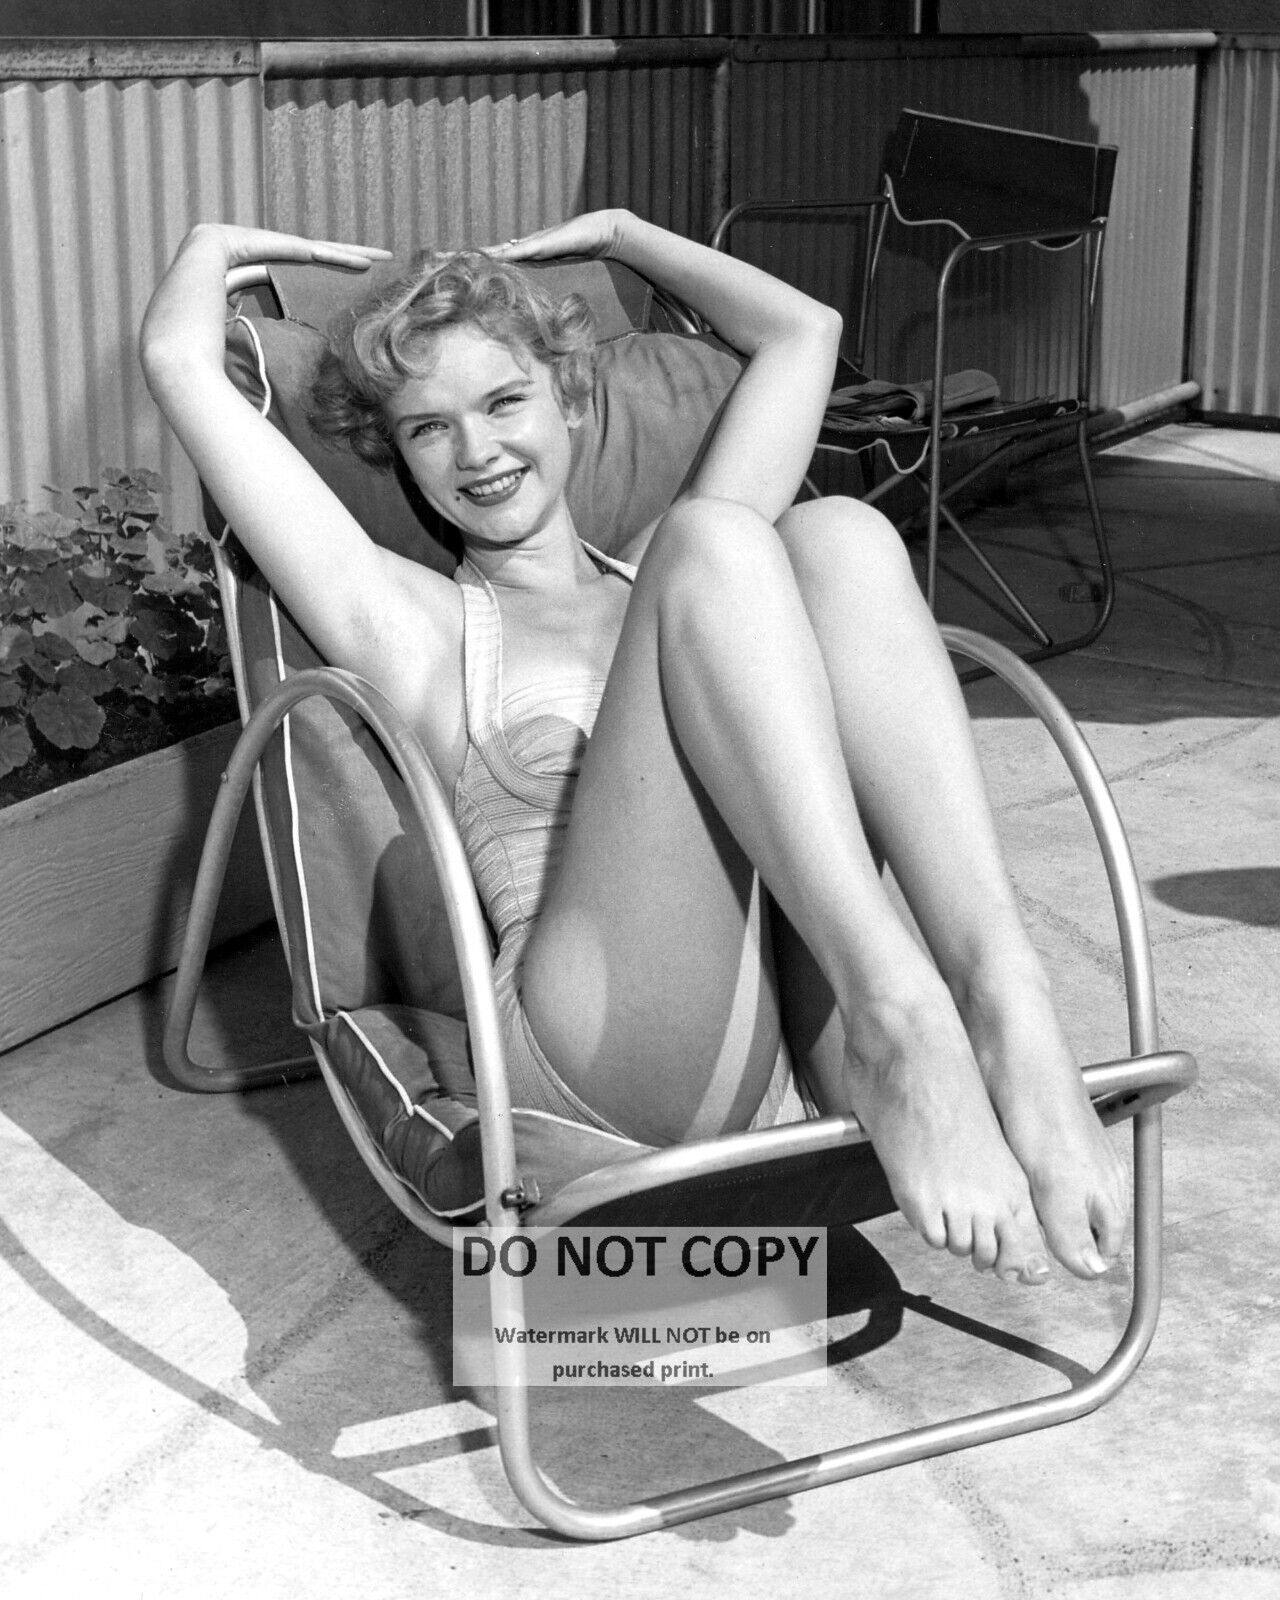 ACTRESS ANNE FRANCIS PIN UP - 8X10 PUBLICITY PHOTO (BT246)